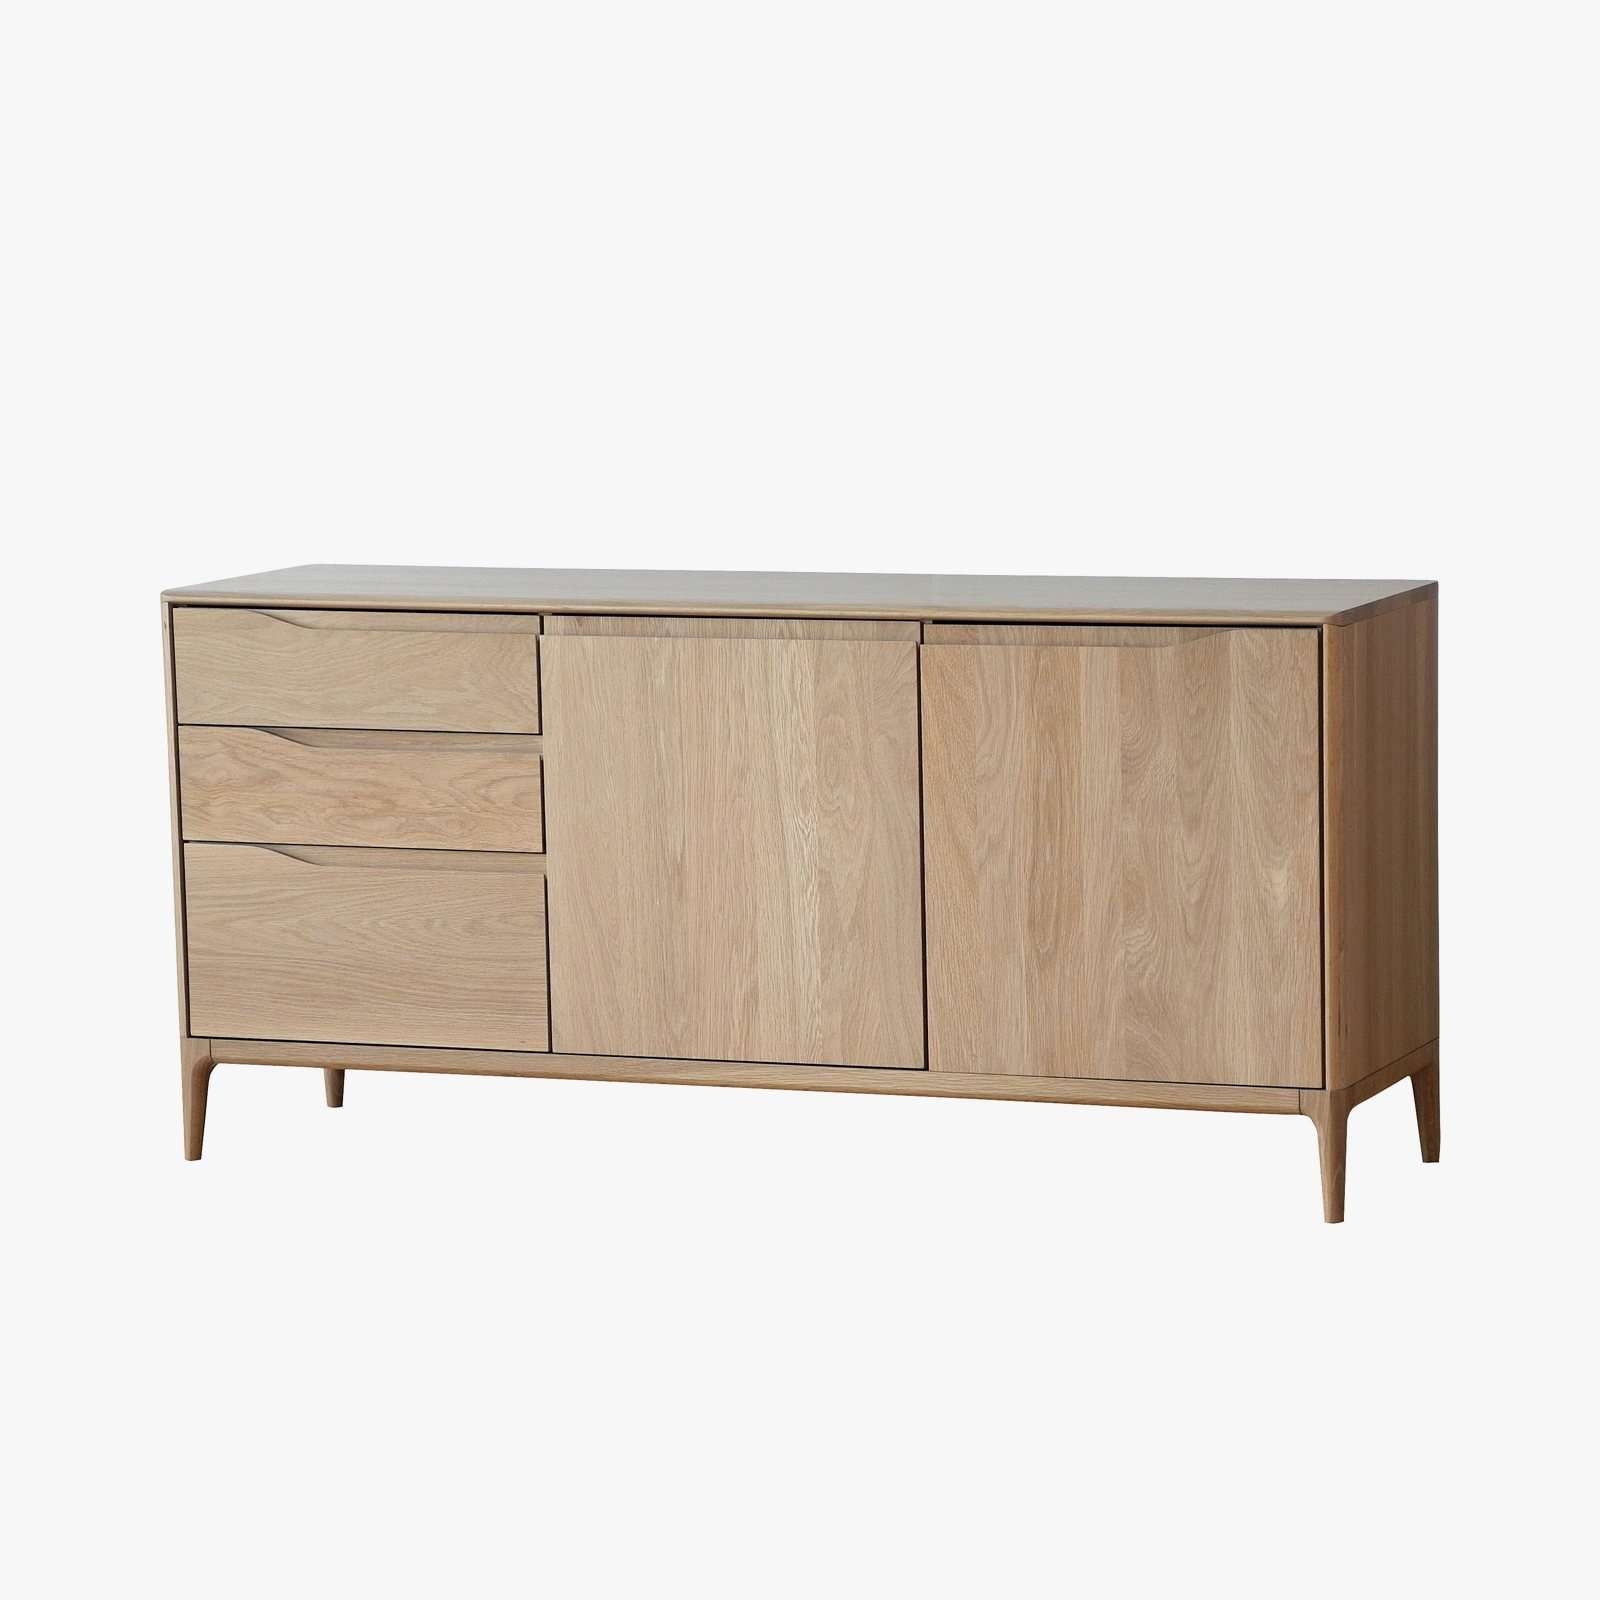 Romana Large Sideboardercol | Up Interiors For Large Sideboards (View 17 of 20)